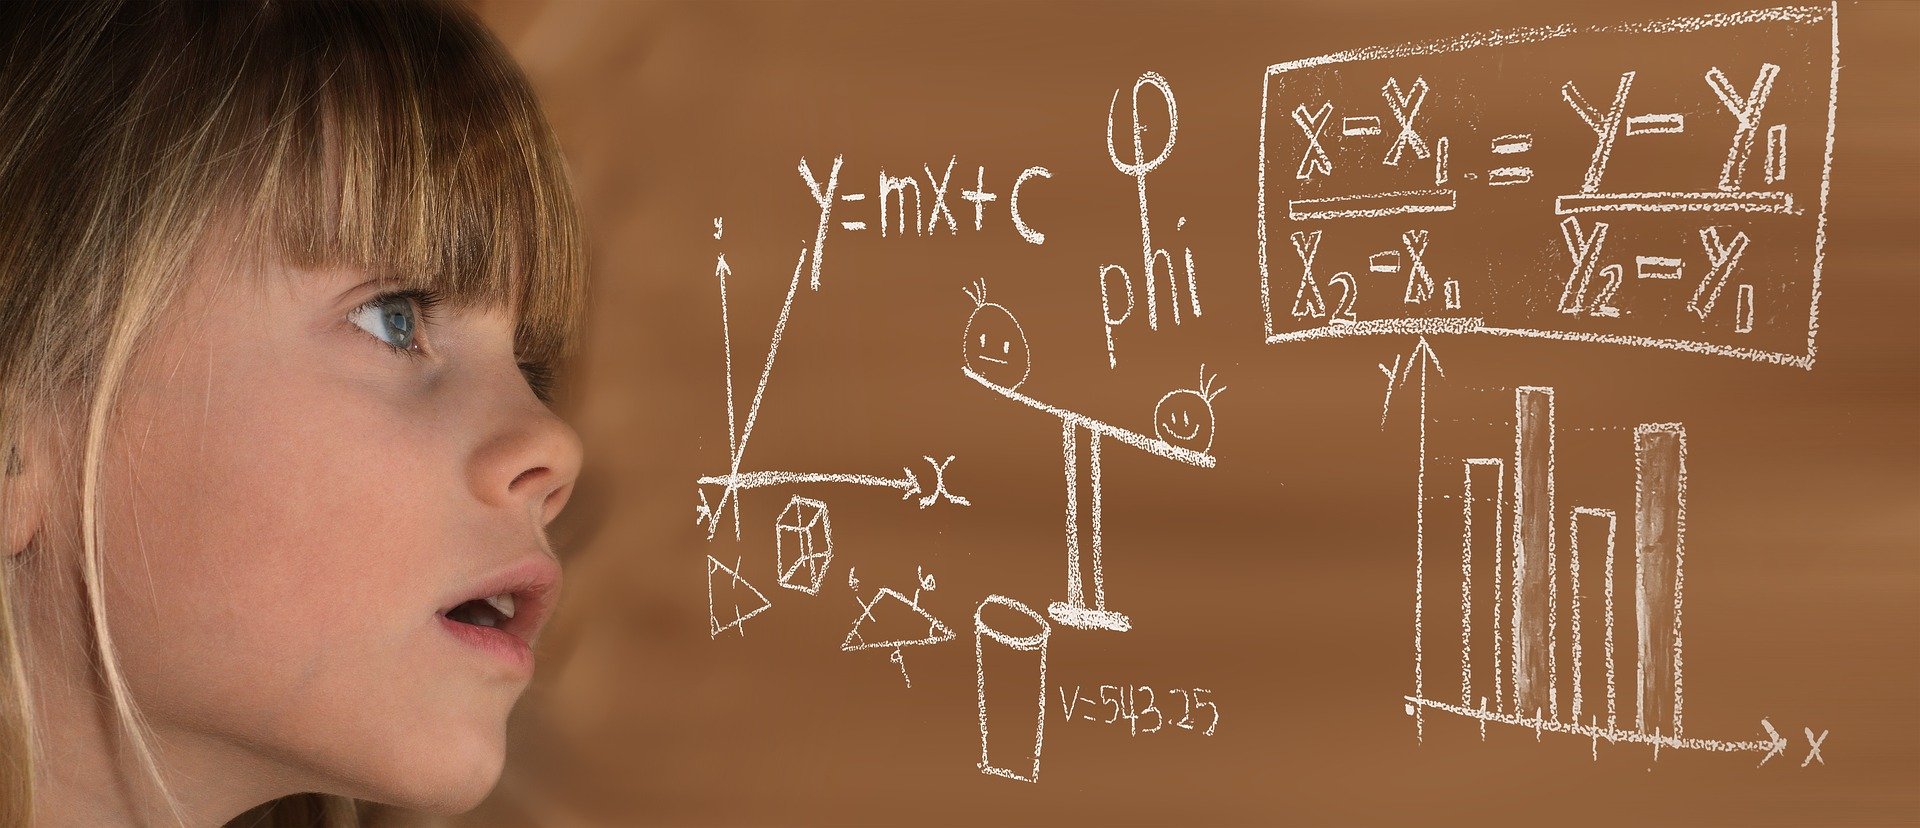 A young child looks at a maths problem written on a blackboard. | Source: Pixabay.